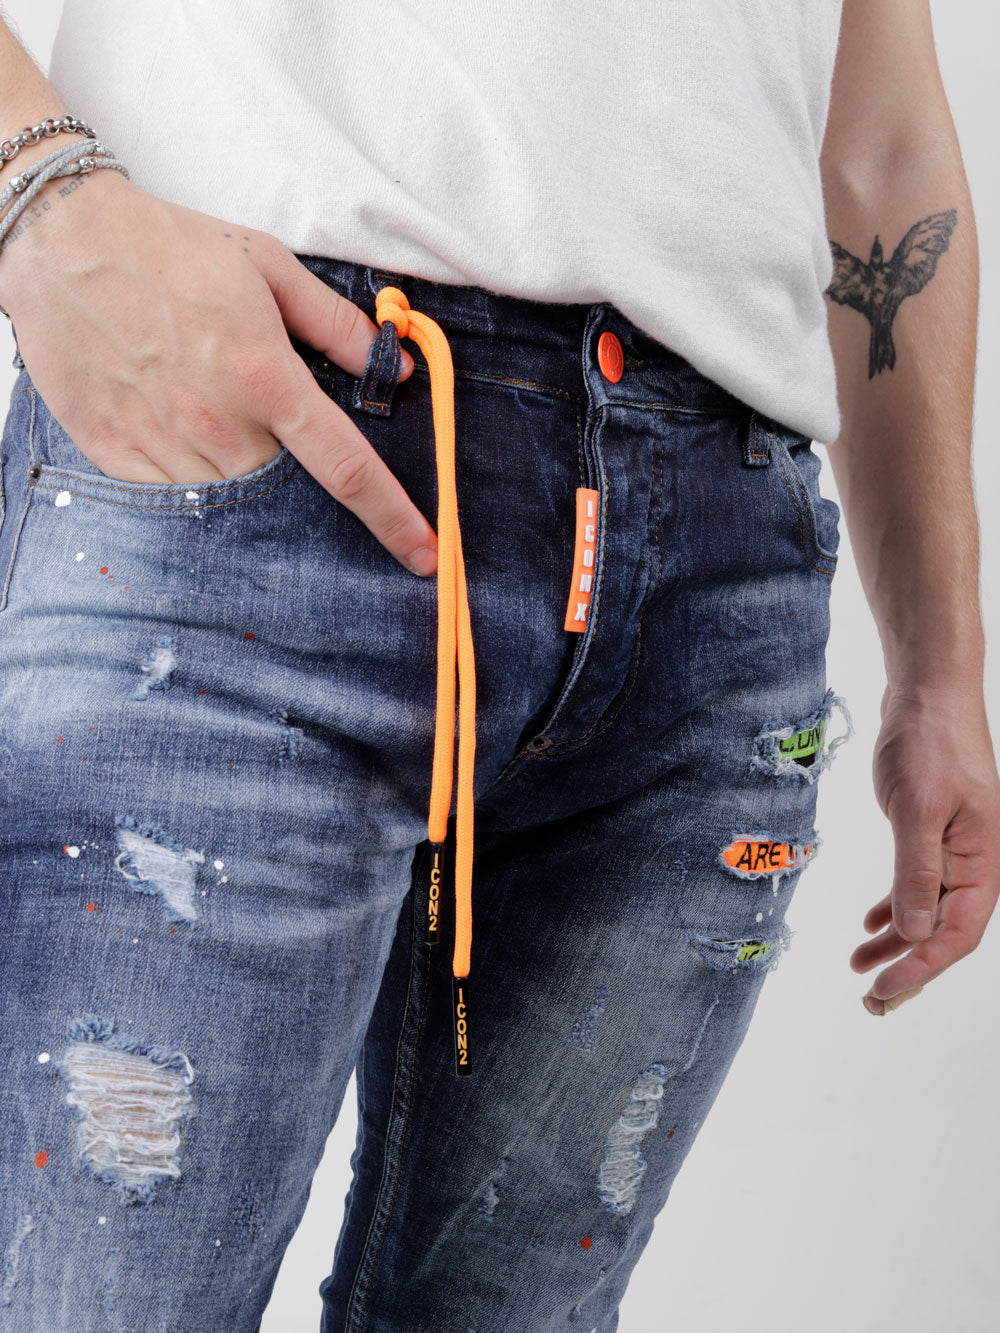 A man is wearing GRAPHITE jeans with an orange belt.